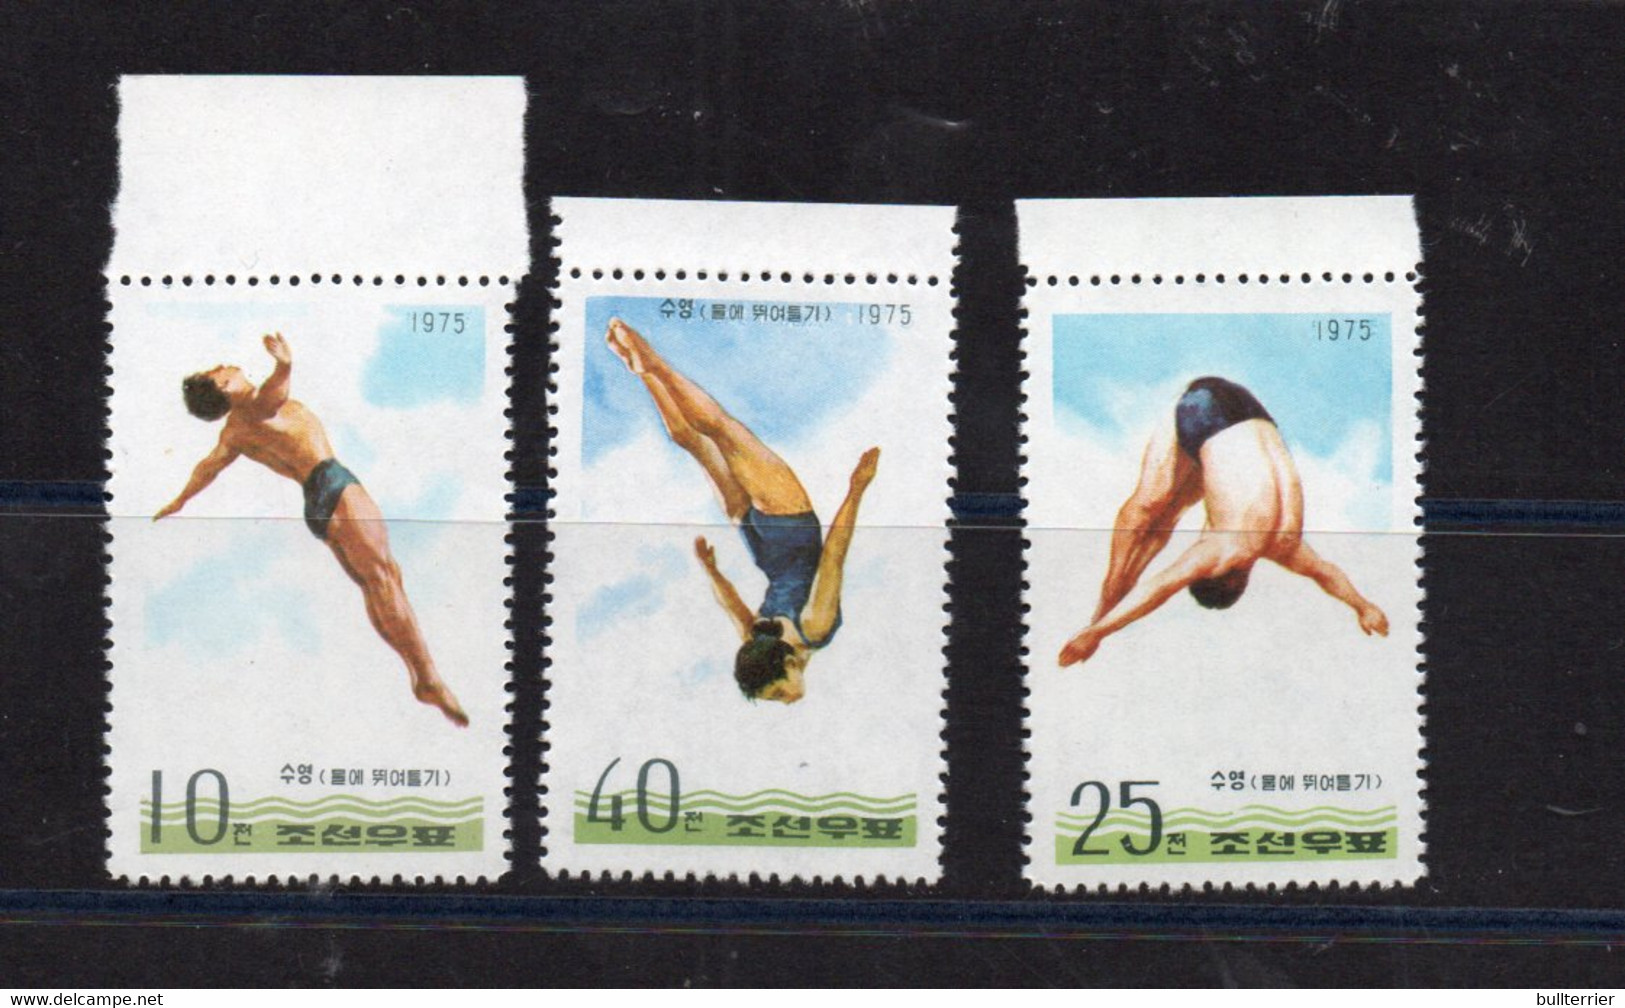 NORTH KOREA - 1975 - DIVING SET OF 3 MINT NEVER HINGED - Diving